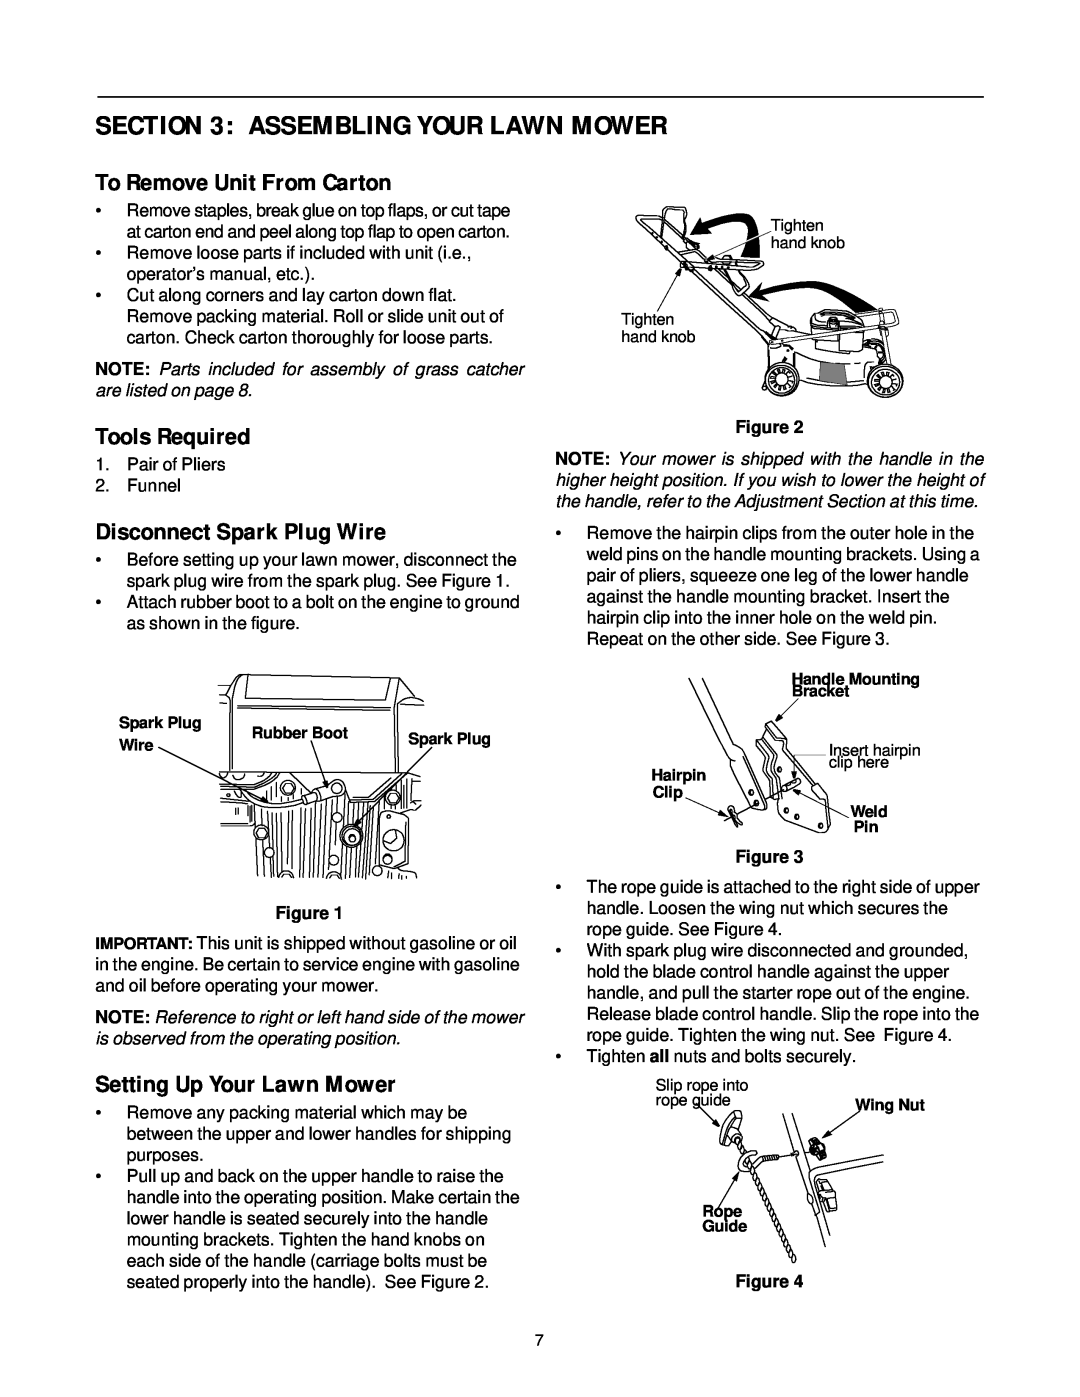 White Outdoor LC-436 Assembling Your Lawn Mower, To Remove Unit From Carton, Tools Required, Disconnect Spark Plug Wire 